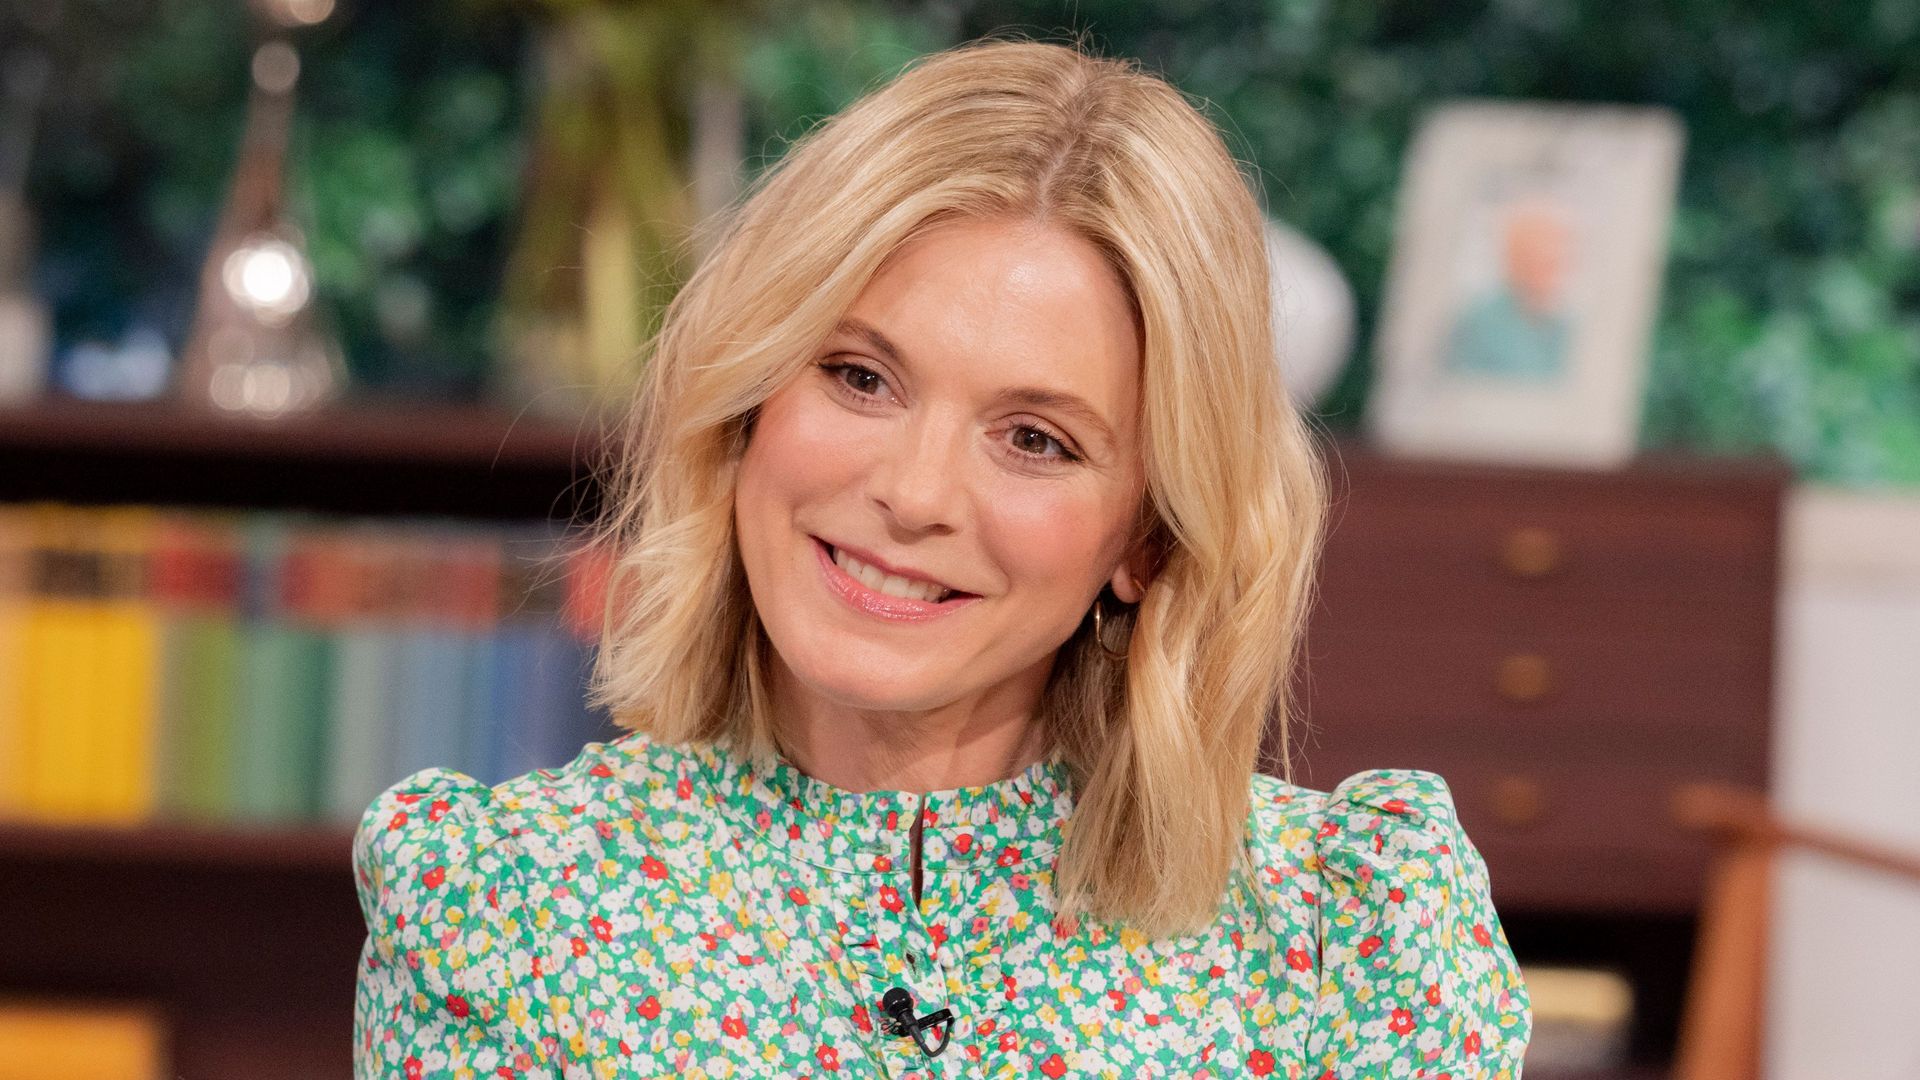 Silent Witness star Emilia Fox's famous family and home life with daughter